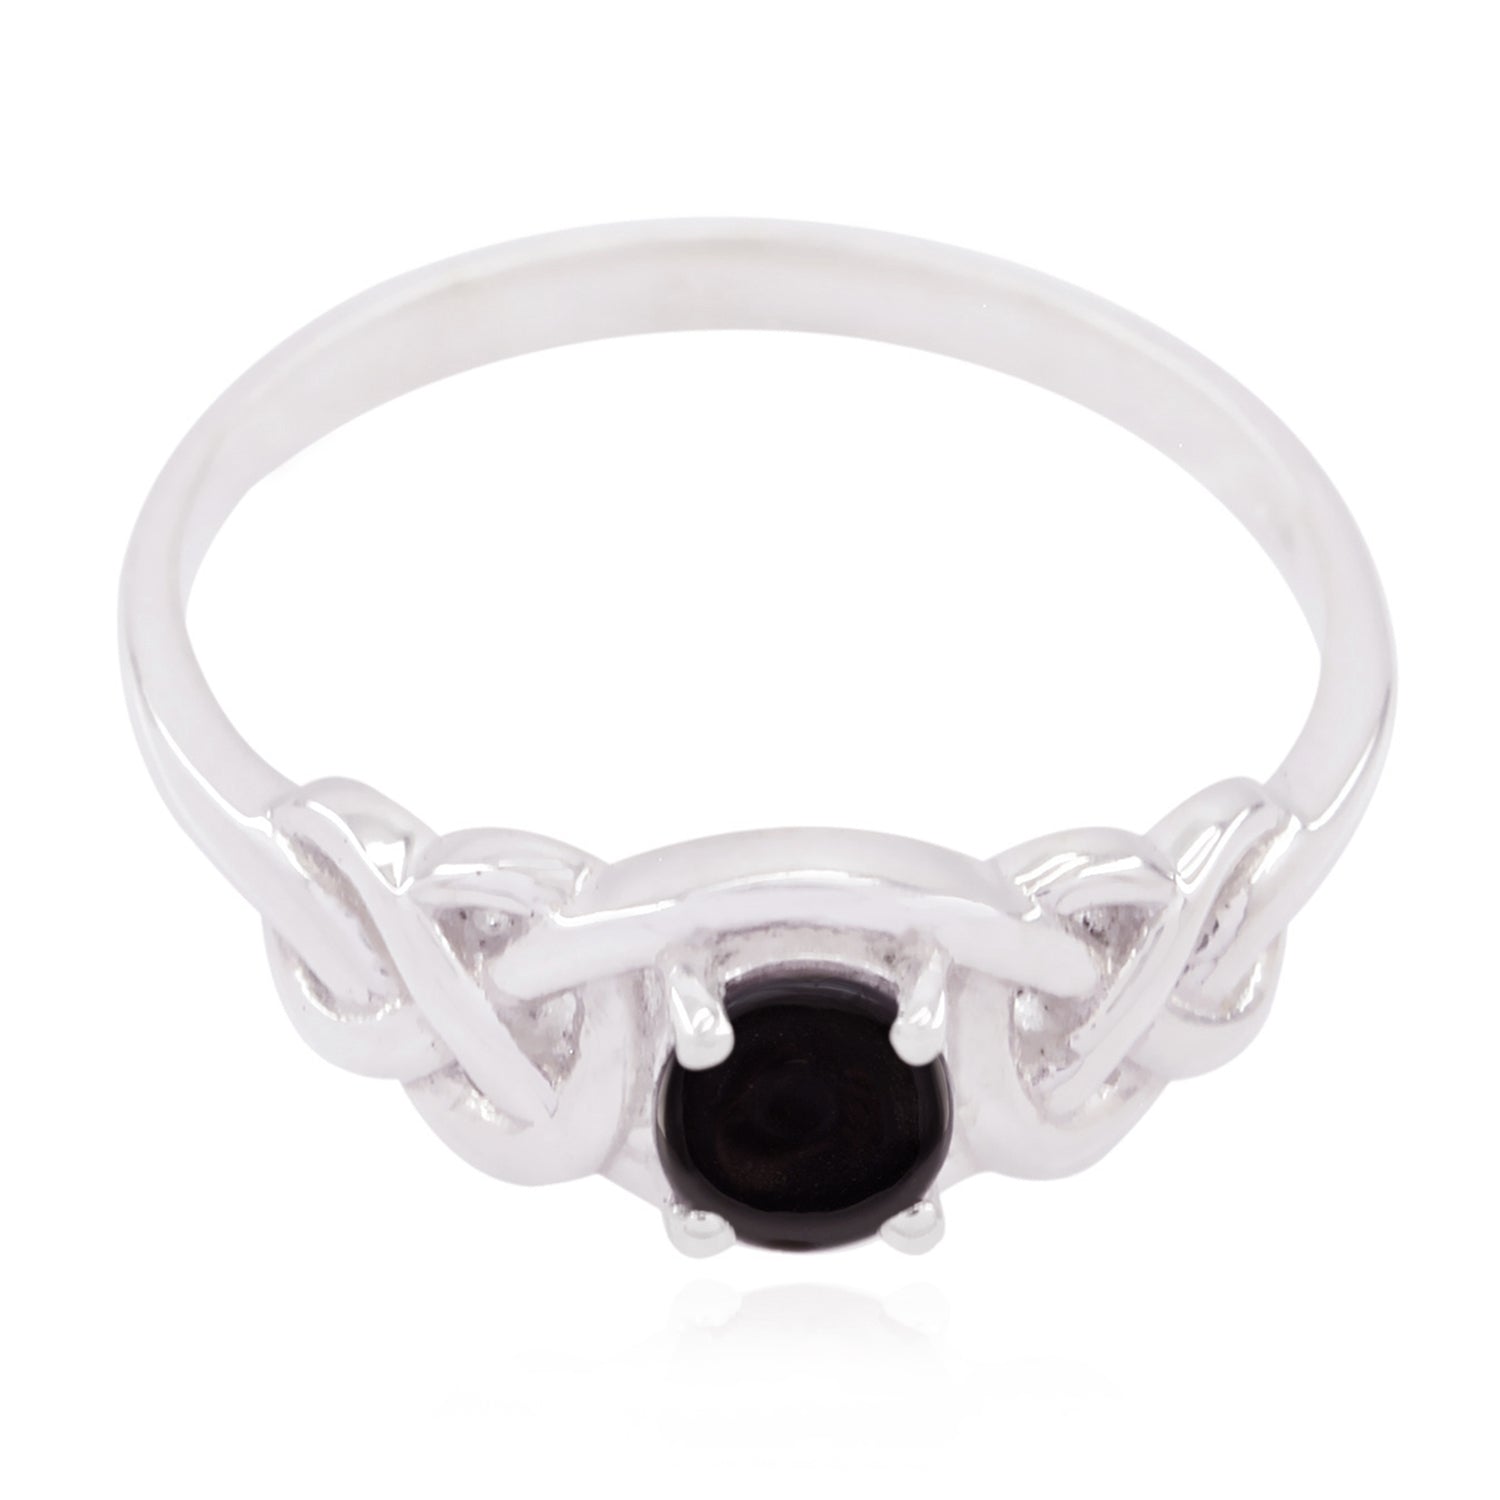 Enticing Stone Black Onyx Sterling Silver Rings Inexpensive Jewelry